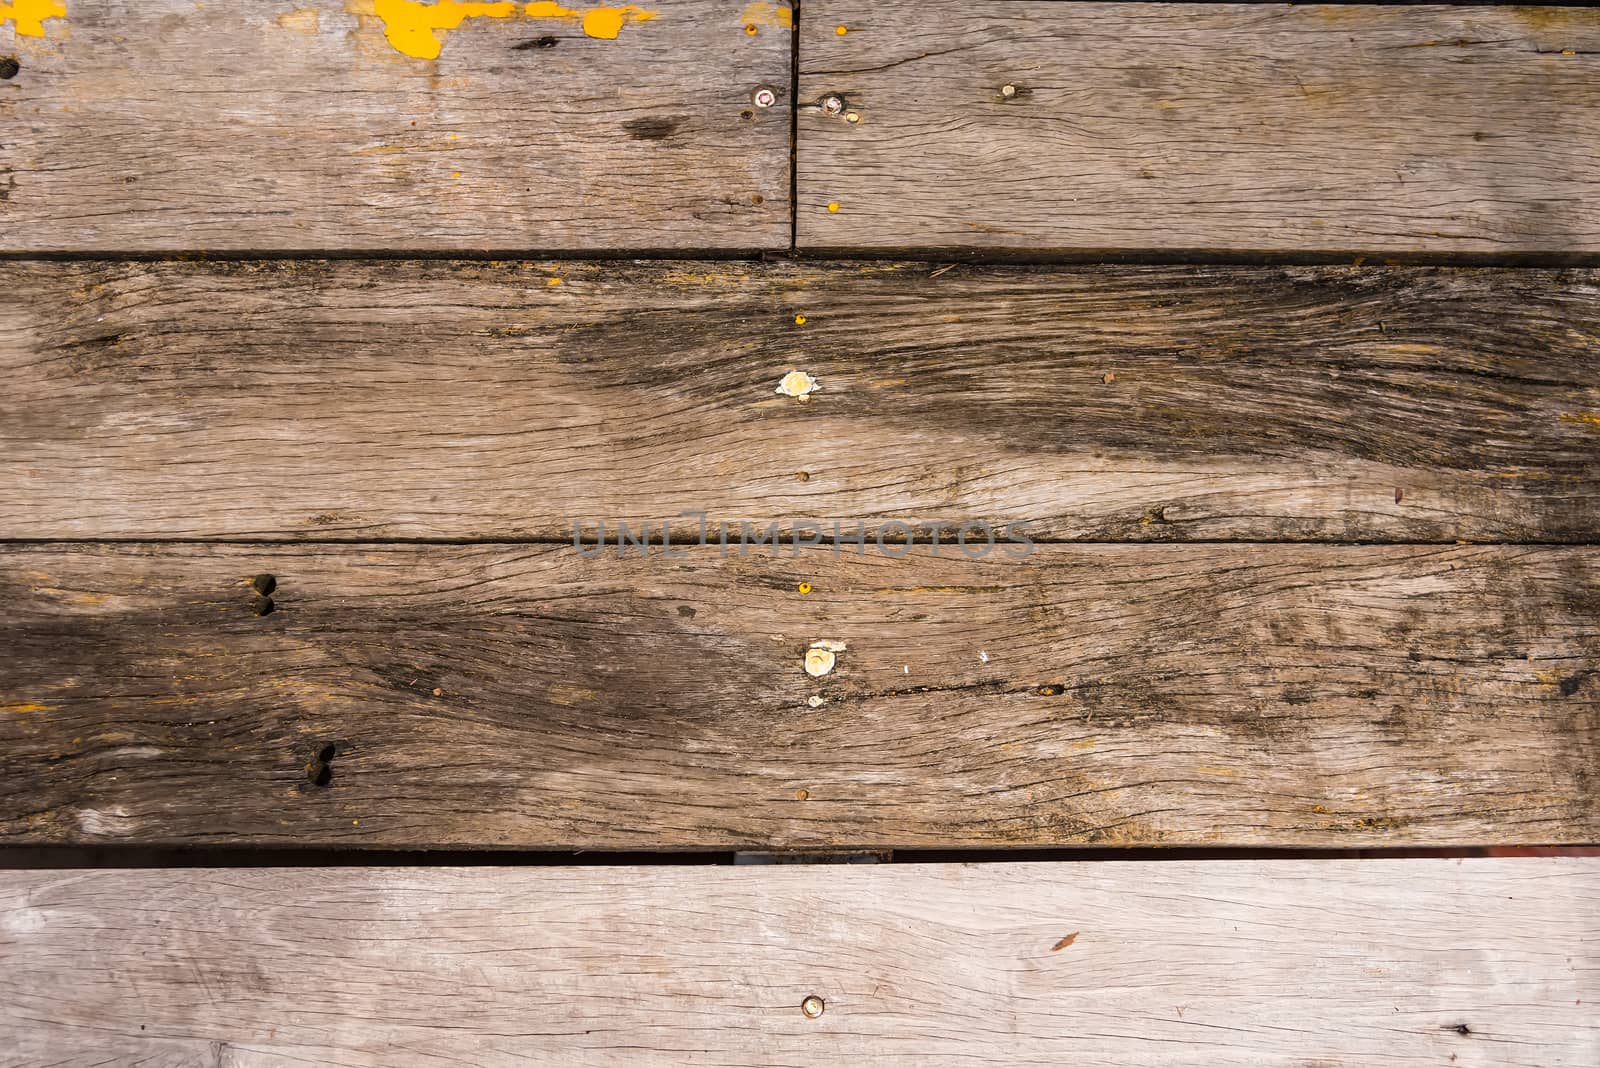 The old wood texture with natural patterns background with rusty by Bubbers